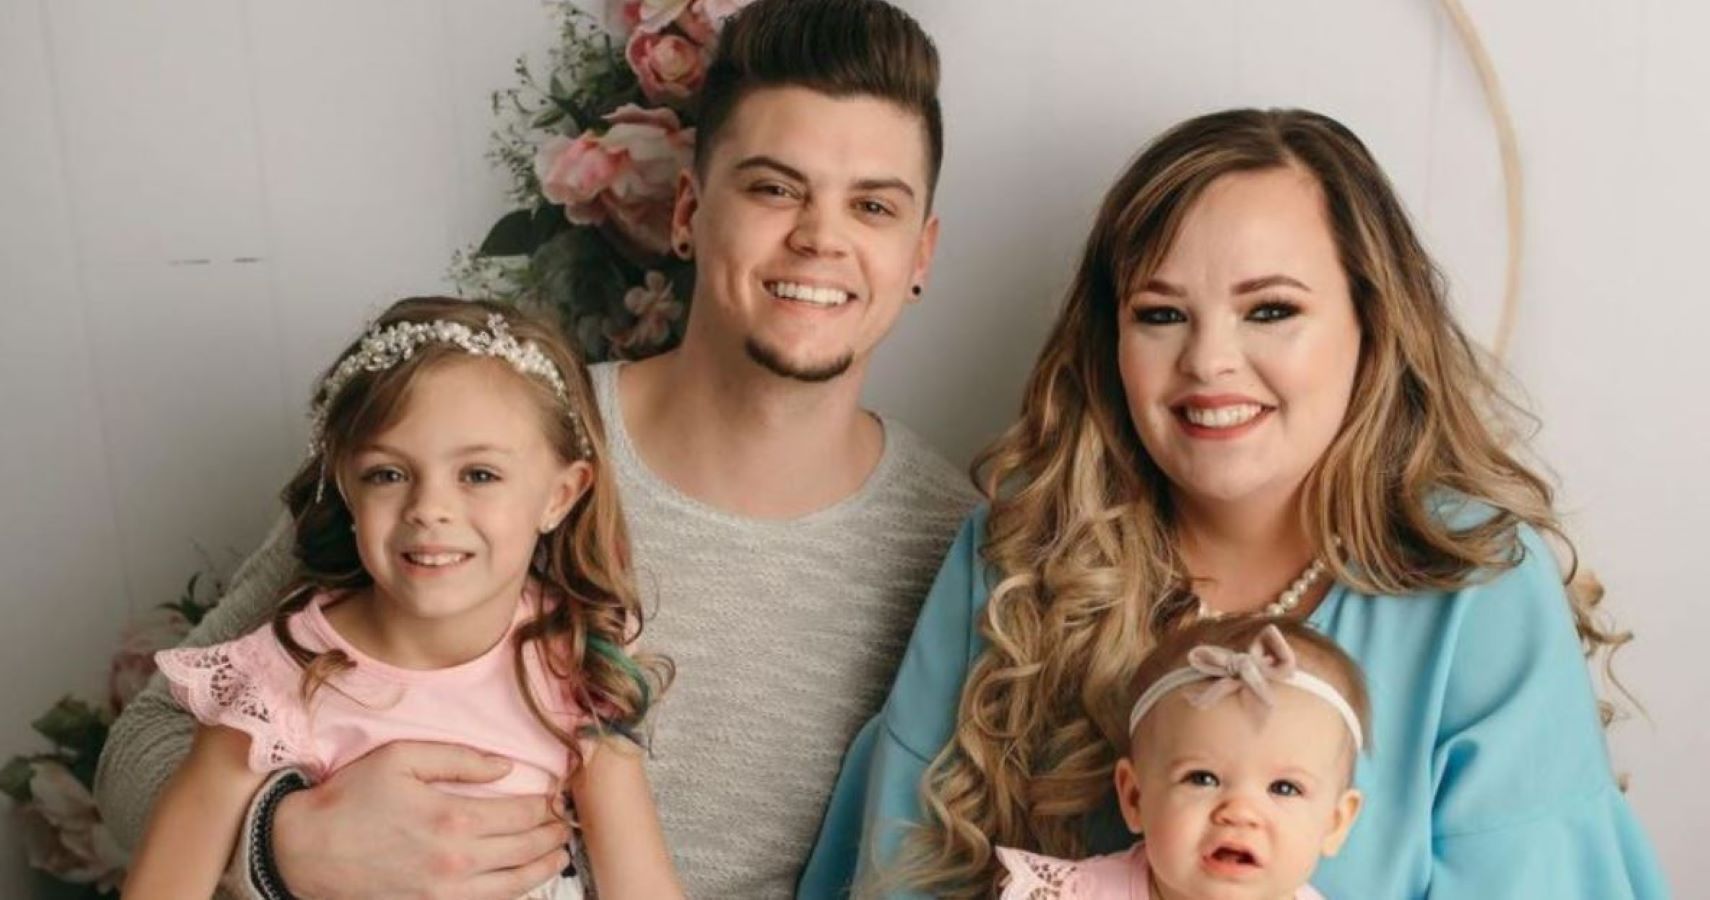 'Teen Mom OG' star Catelynn Lowell suffered miscarriage